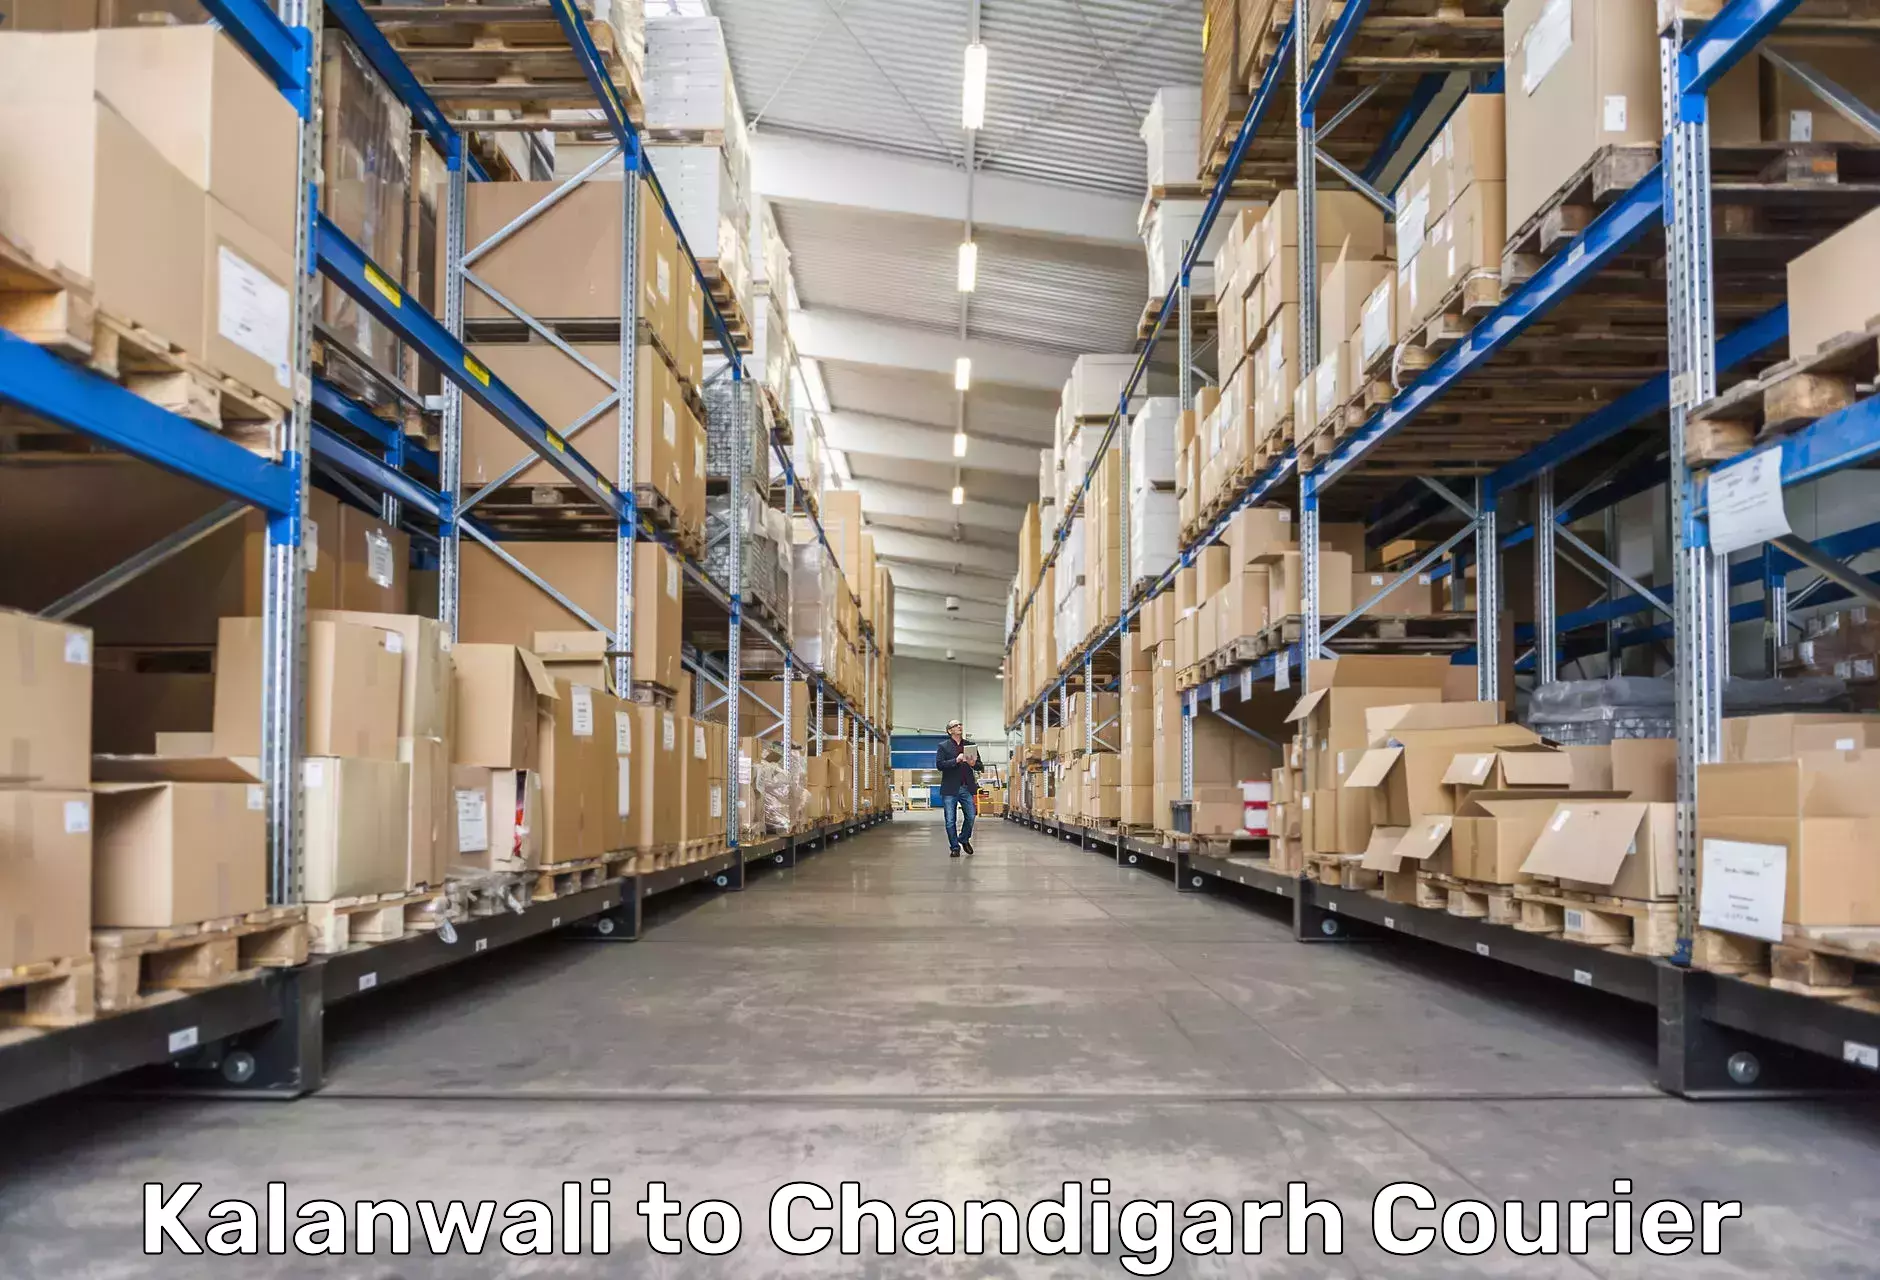 Modern delivery methods Kalanwali to Chandigarh